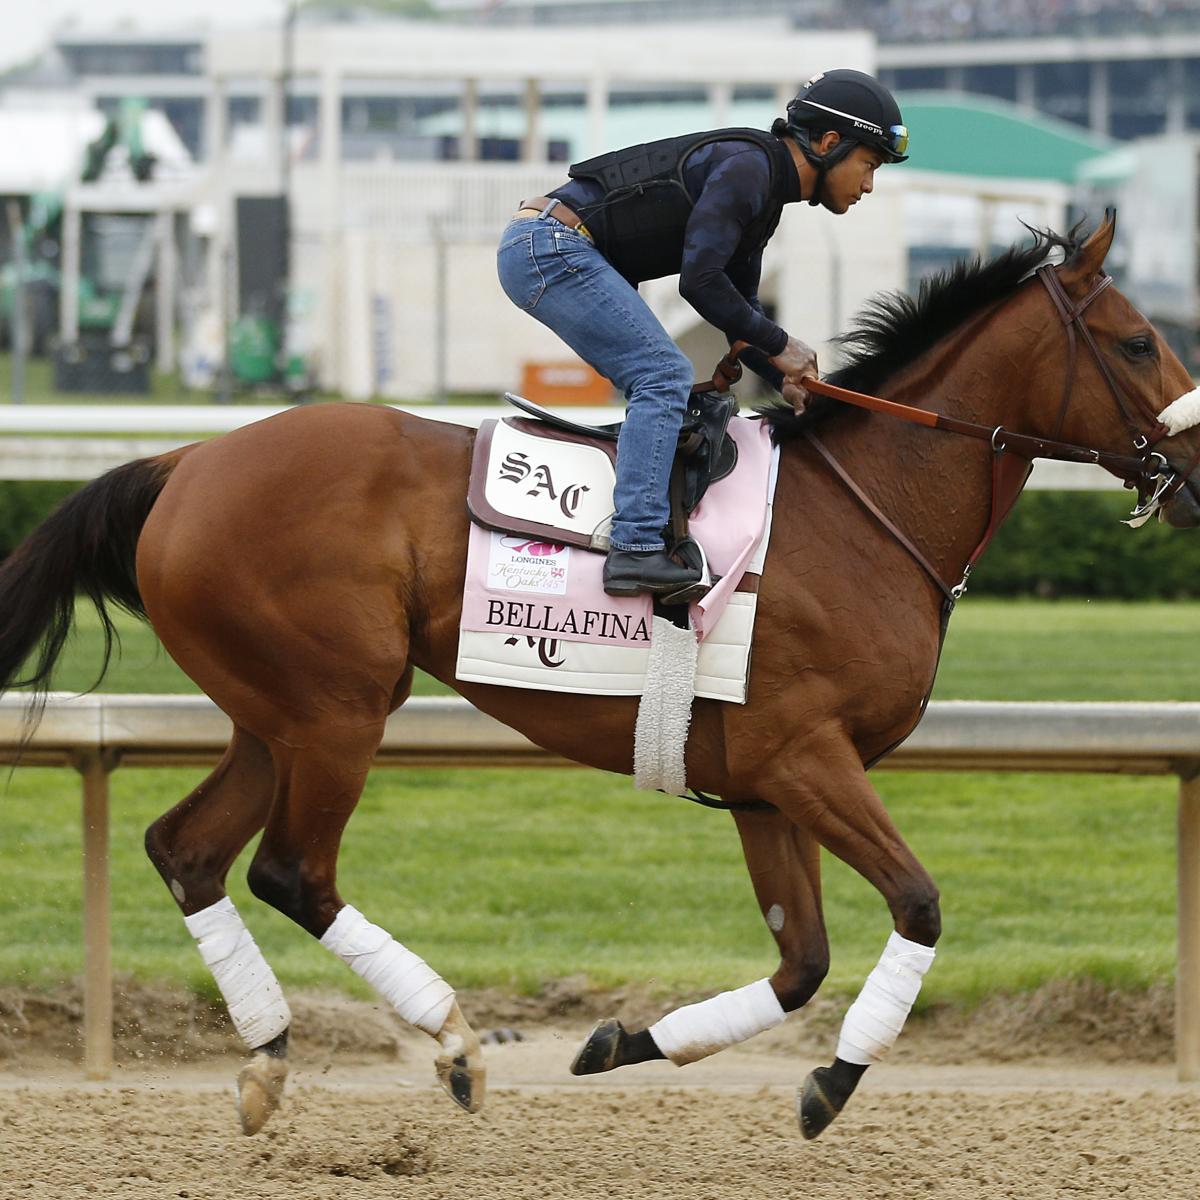 Kentucky Oaks 2019 Post Positions, Field and Race Preview News